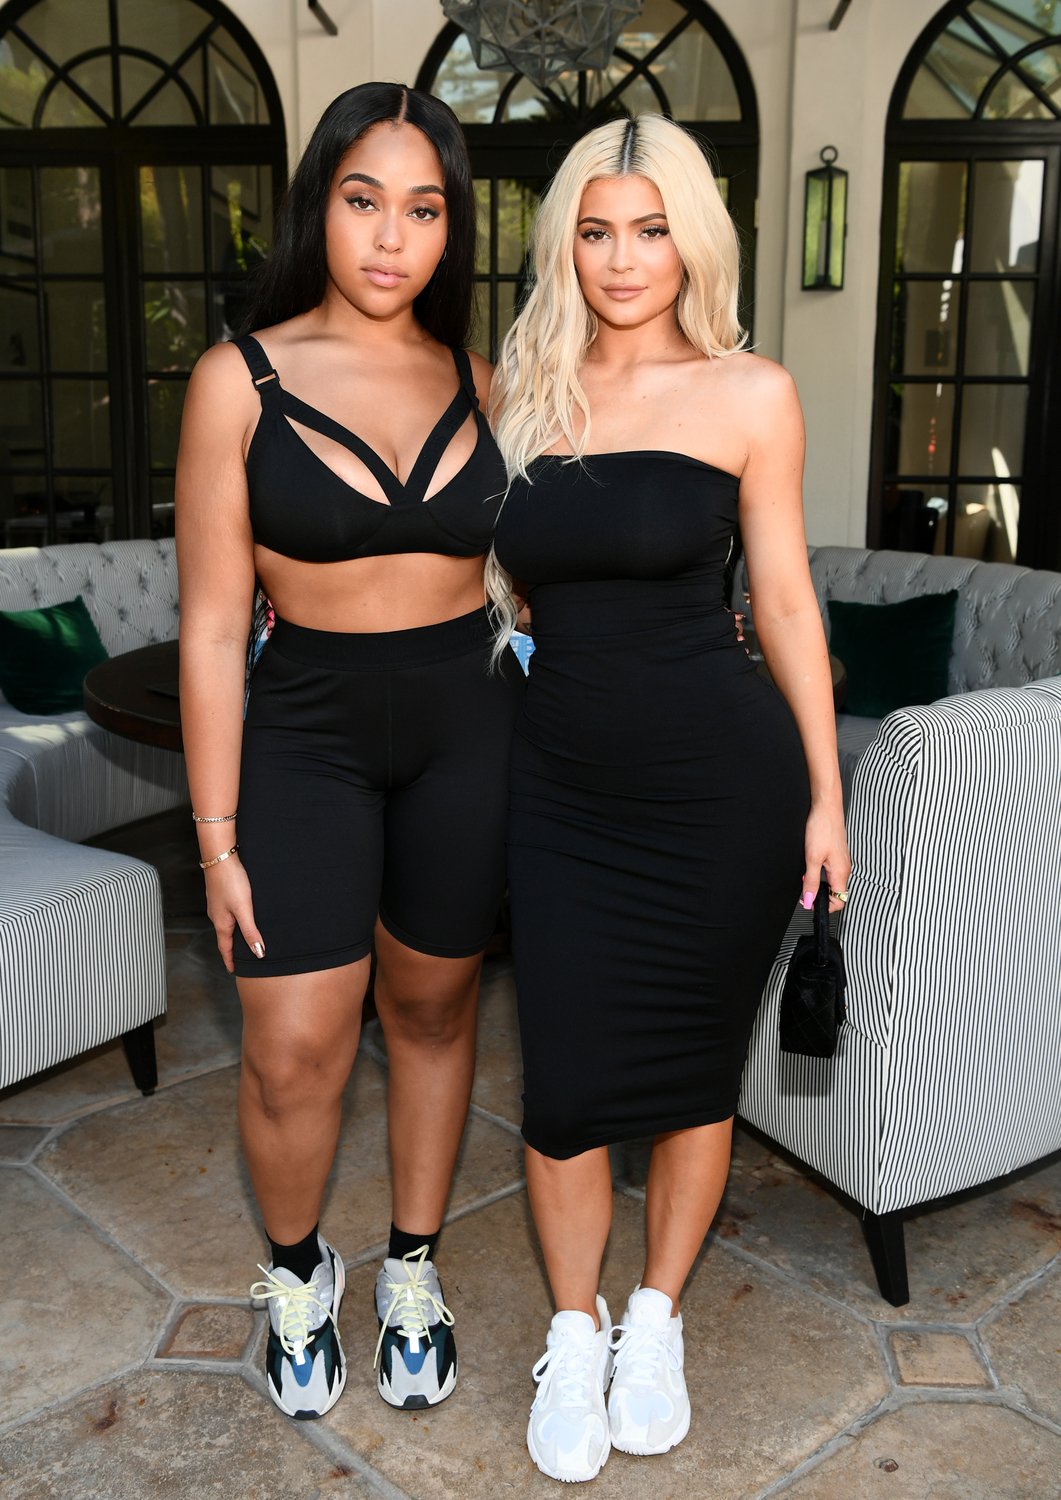 Jordyn Woods and Kylie Jenner attend the launch event of the activewear label SECNDNTURE by Jordyn Woods at a private residence on August 29, 2018 in West Hollywood, California | Photo: GettyImages